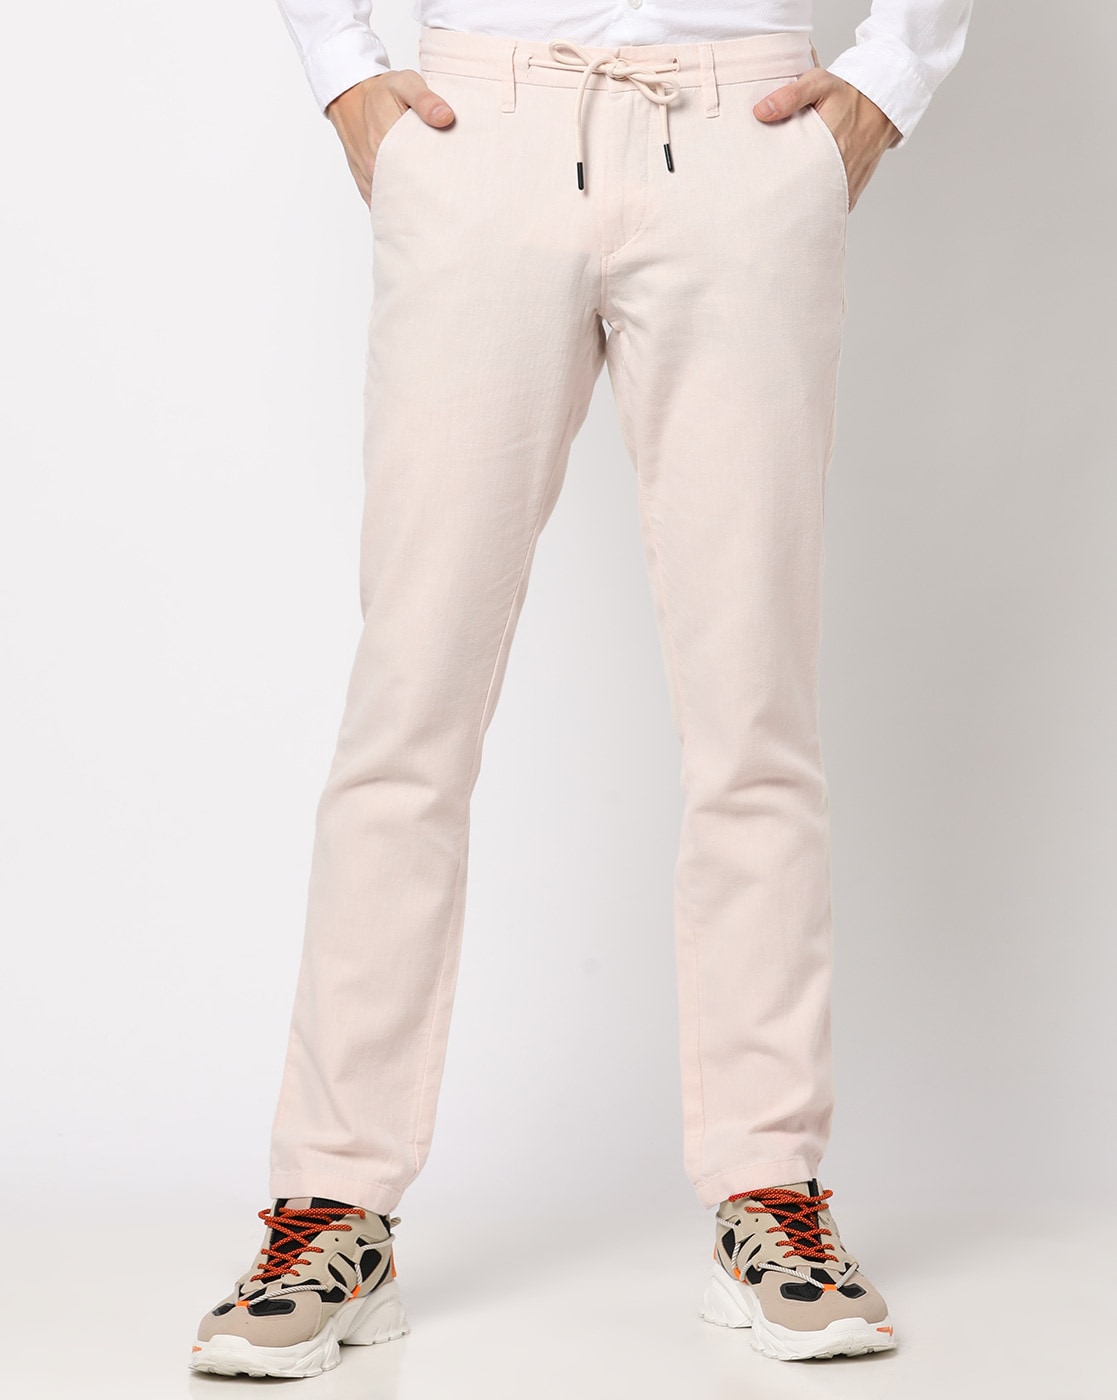 Buy Brown Trousers  Pants for Men by JOHN PLAYERS JEANS Online  Ajiocom